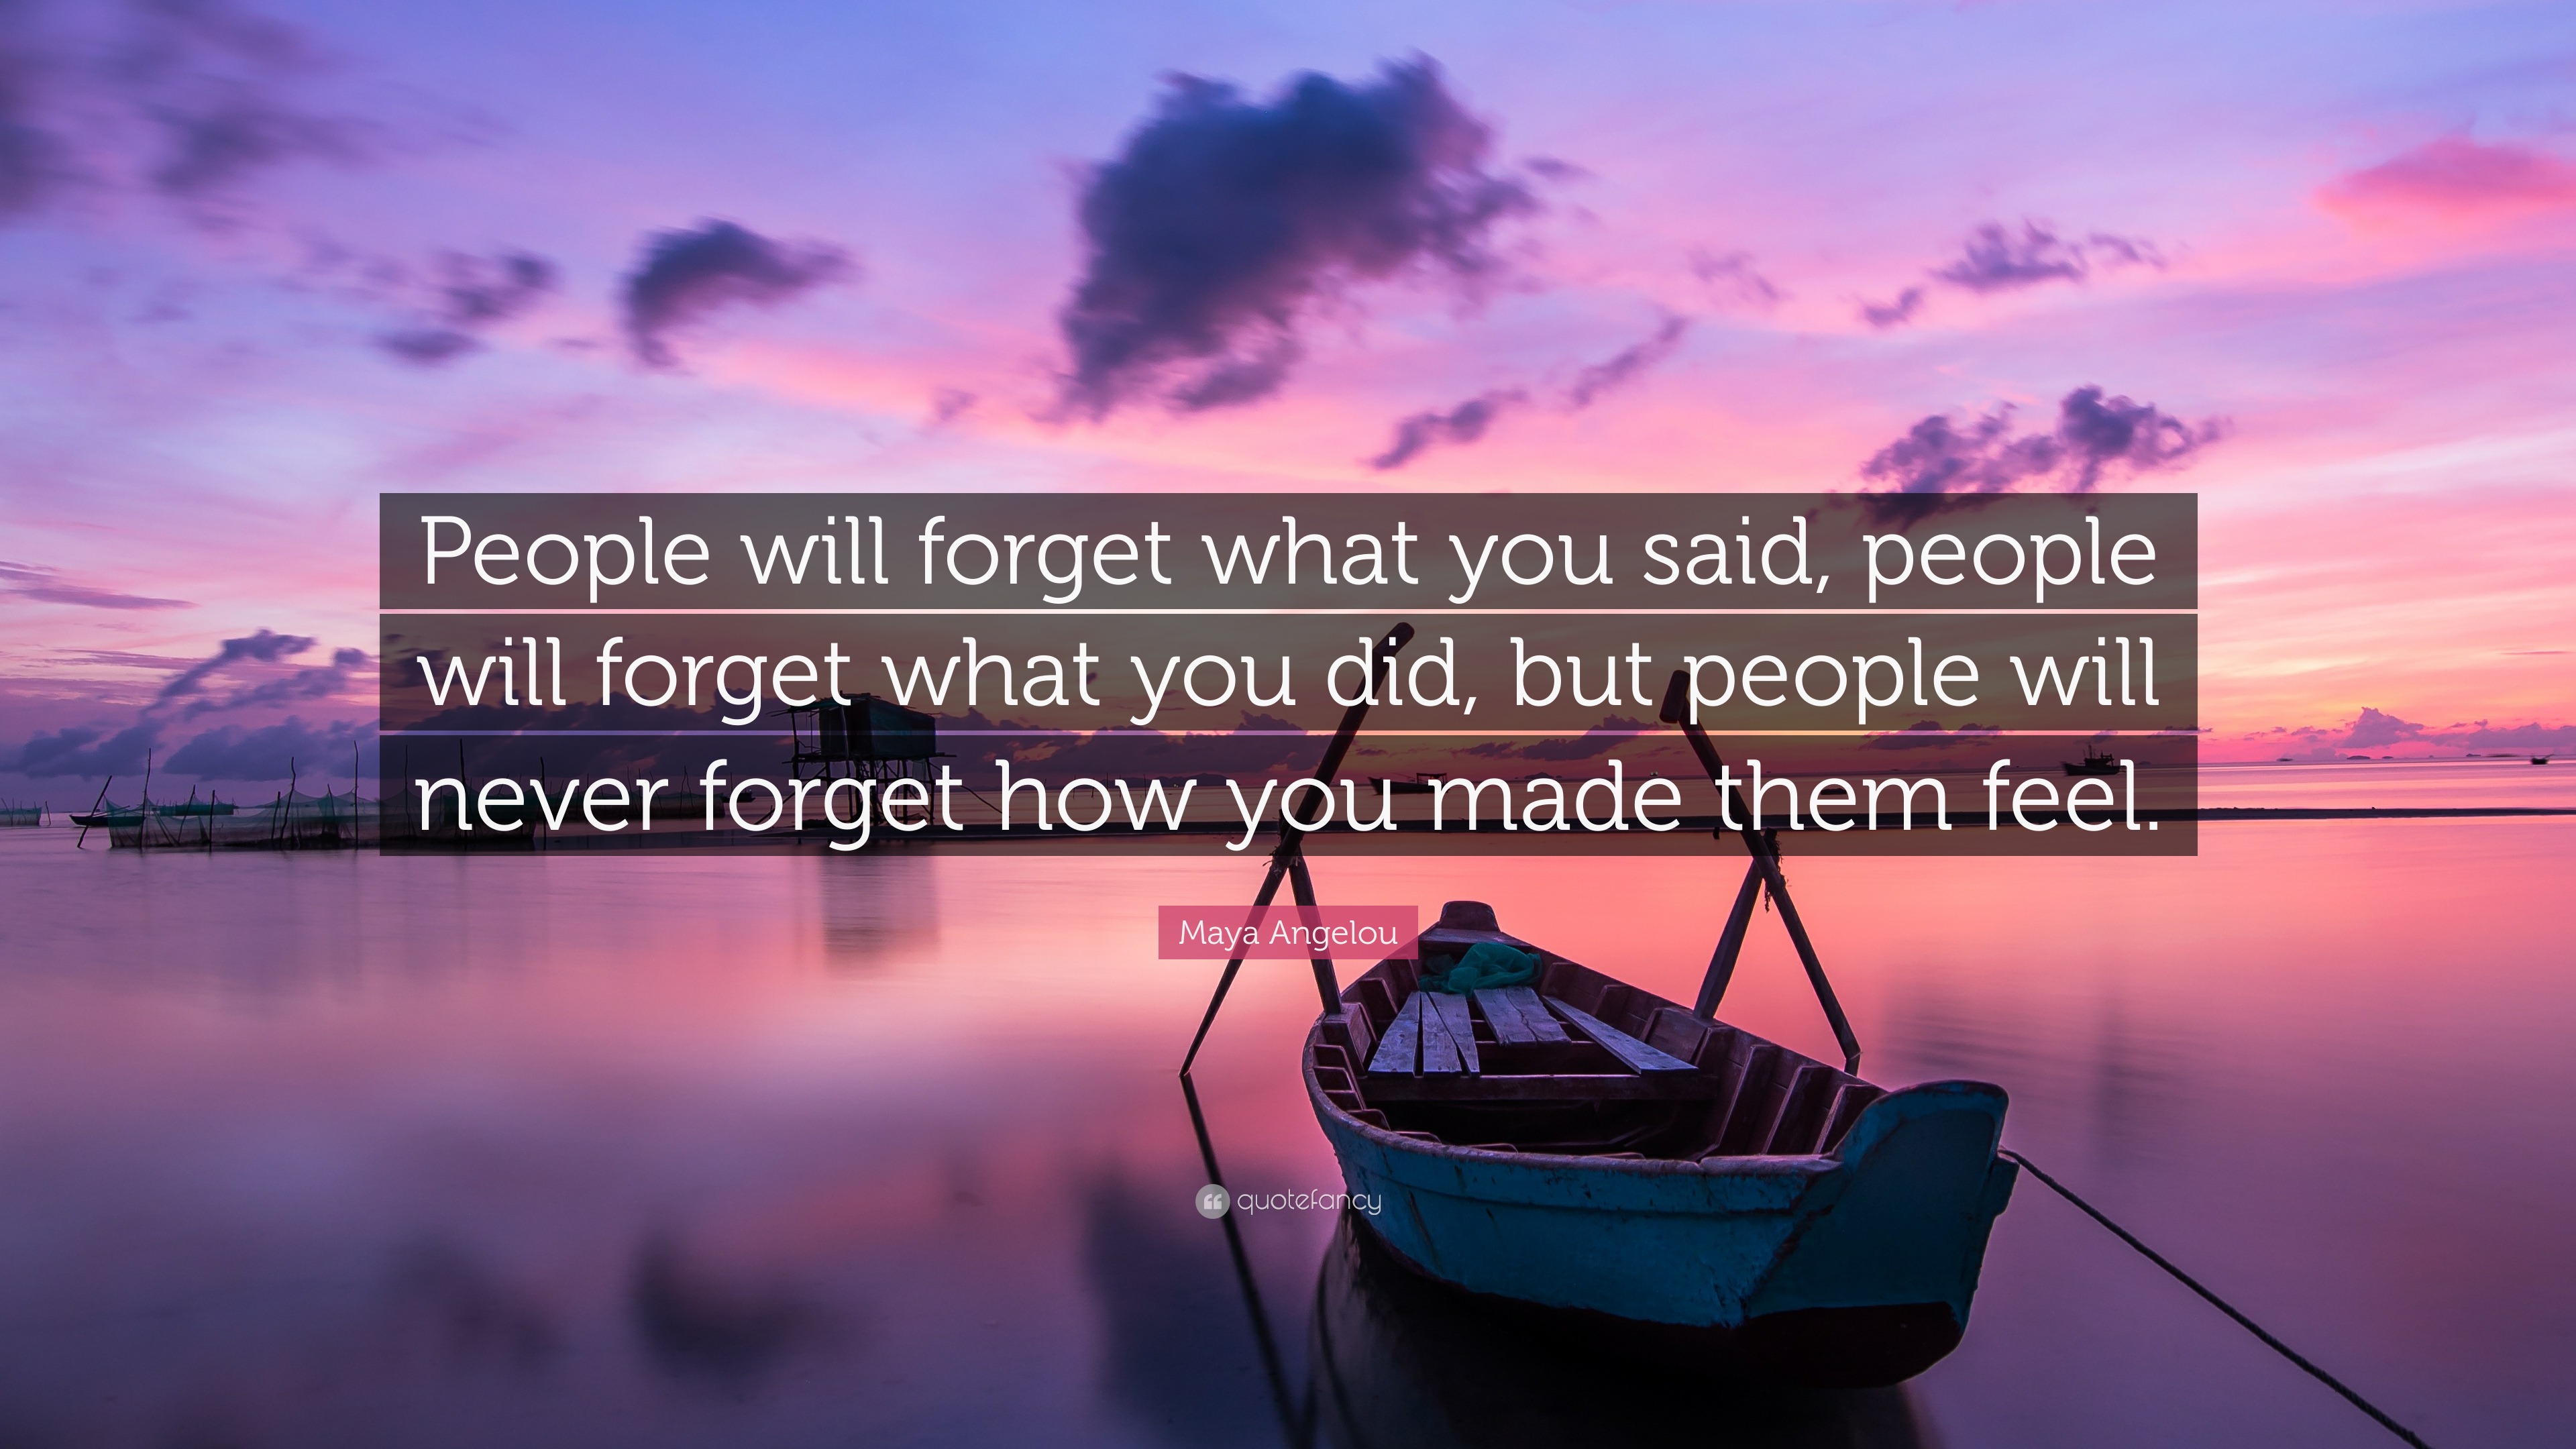 Maya Angelou Quote: “People will forget what you said, people will